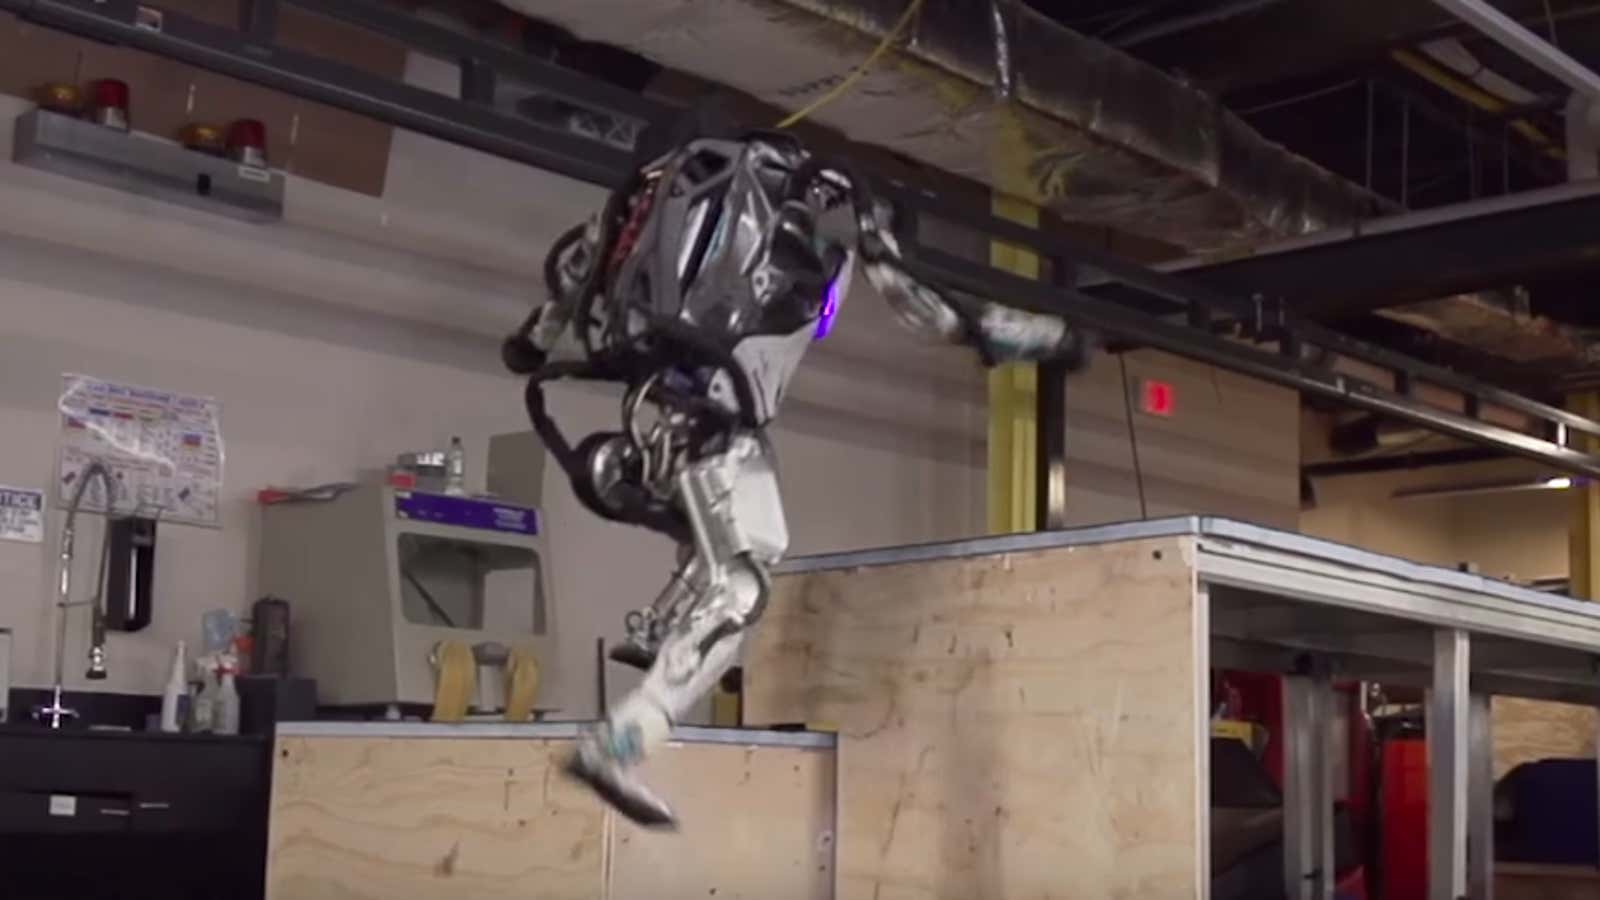 Boston Dynamics’ robot went from a drunk baby to a nimble ninja in a matter of years